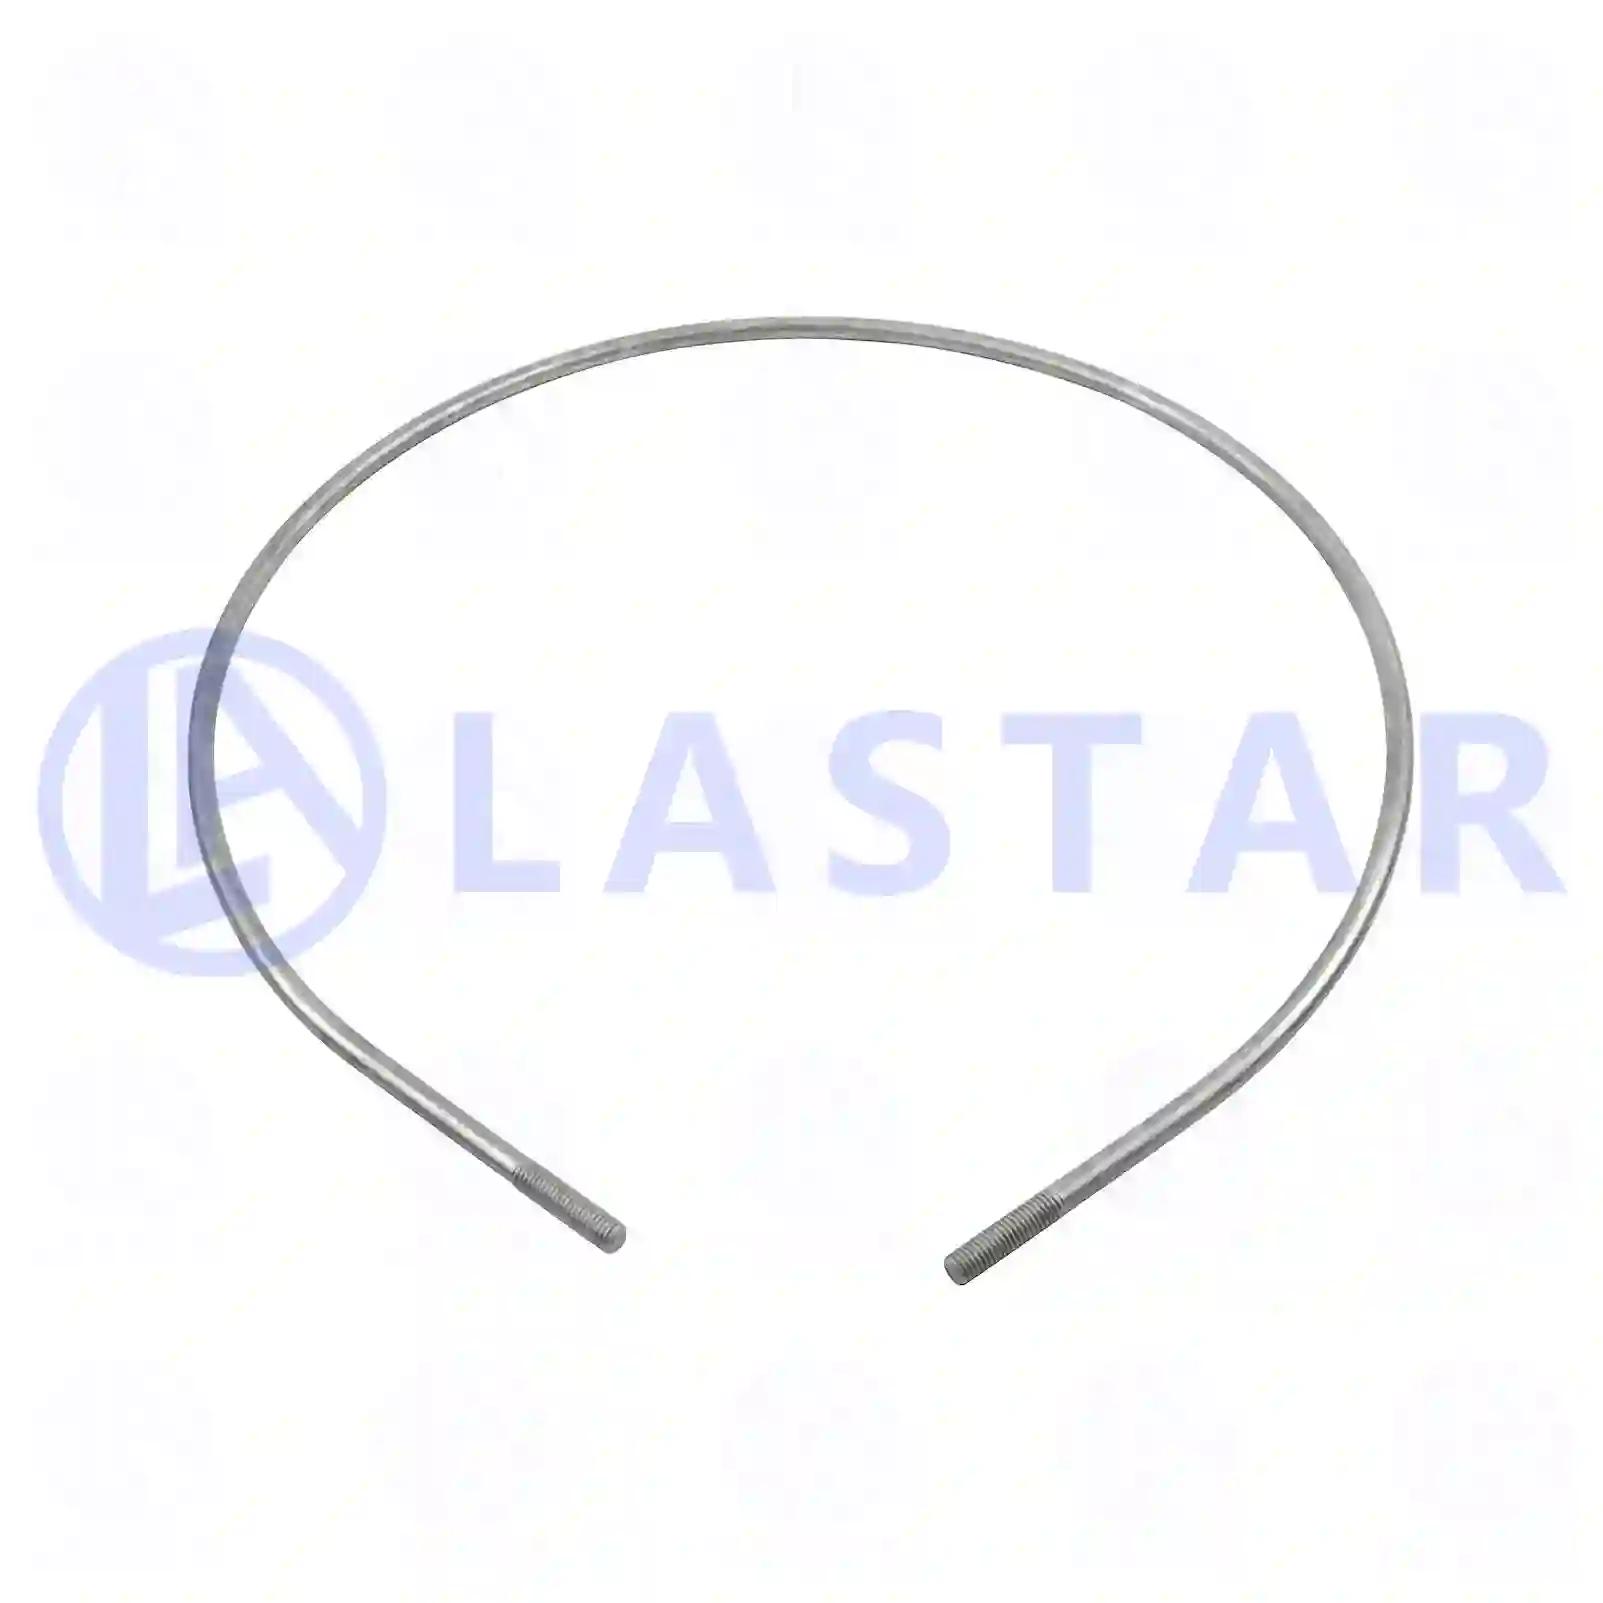 Tensioning band, 77706674, 7420511346, 7420745894, 20745894 ||  77706674 Lastar Spare Part | Truck Spare Parts, Auotomotive Spare Parts Tensioning band, 77706674, 7420511346, 7420745894, 20745894 ||  77706674 Lastar Spare Part | Truck Spare Parts, Auotomotive Spare Parts